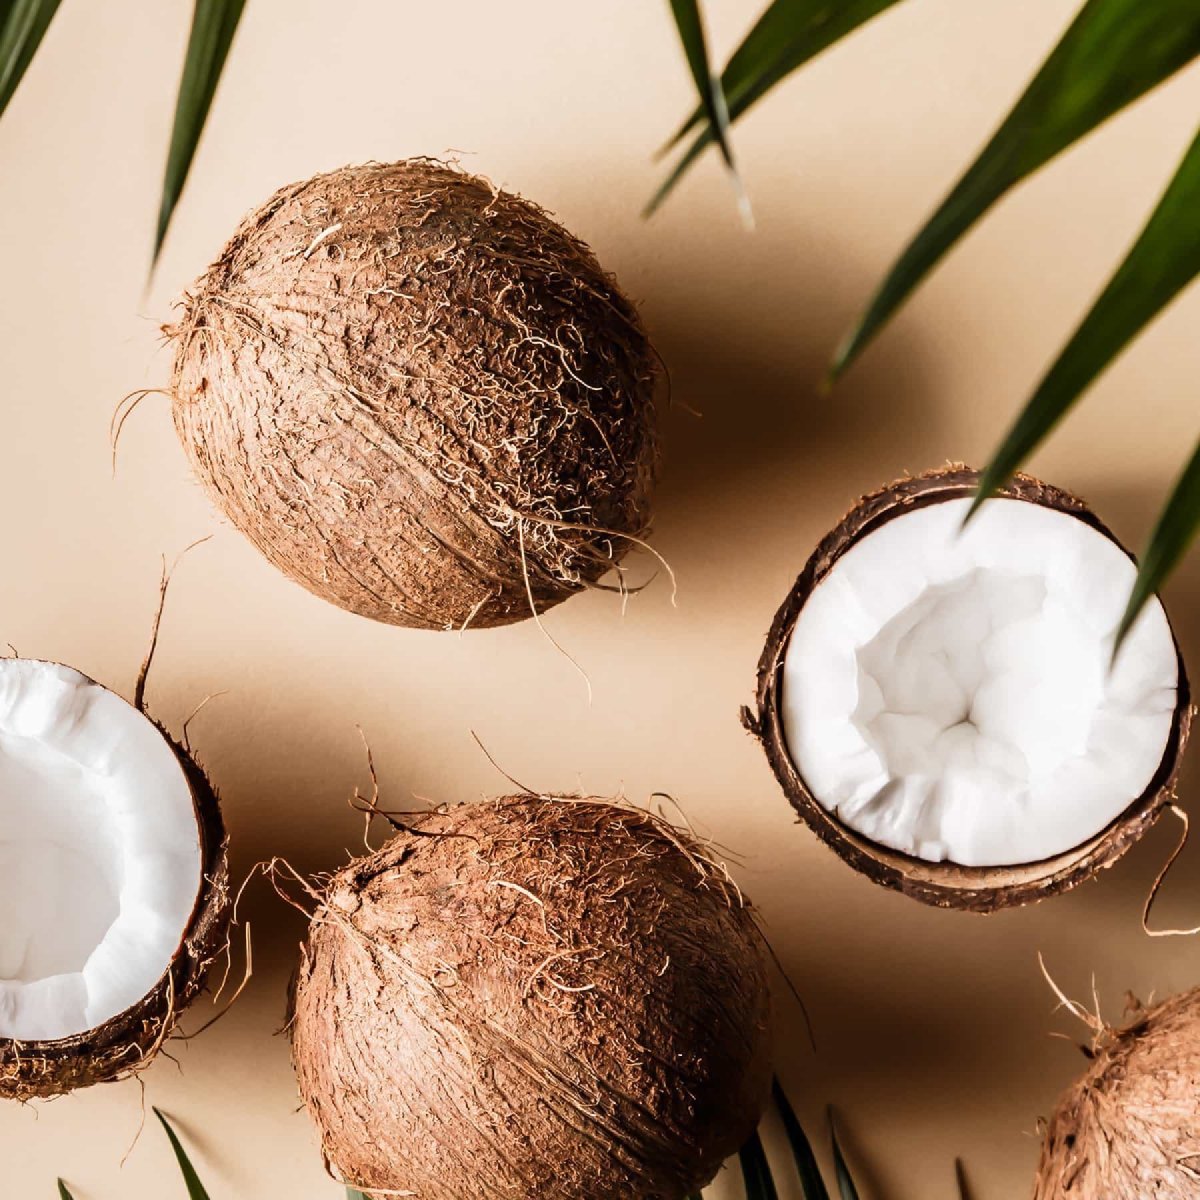 Benefits Of The Coconut Oil